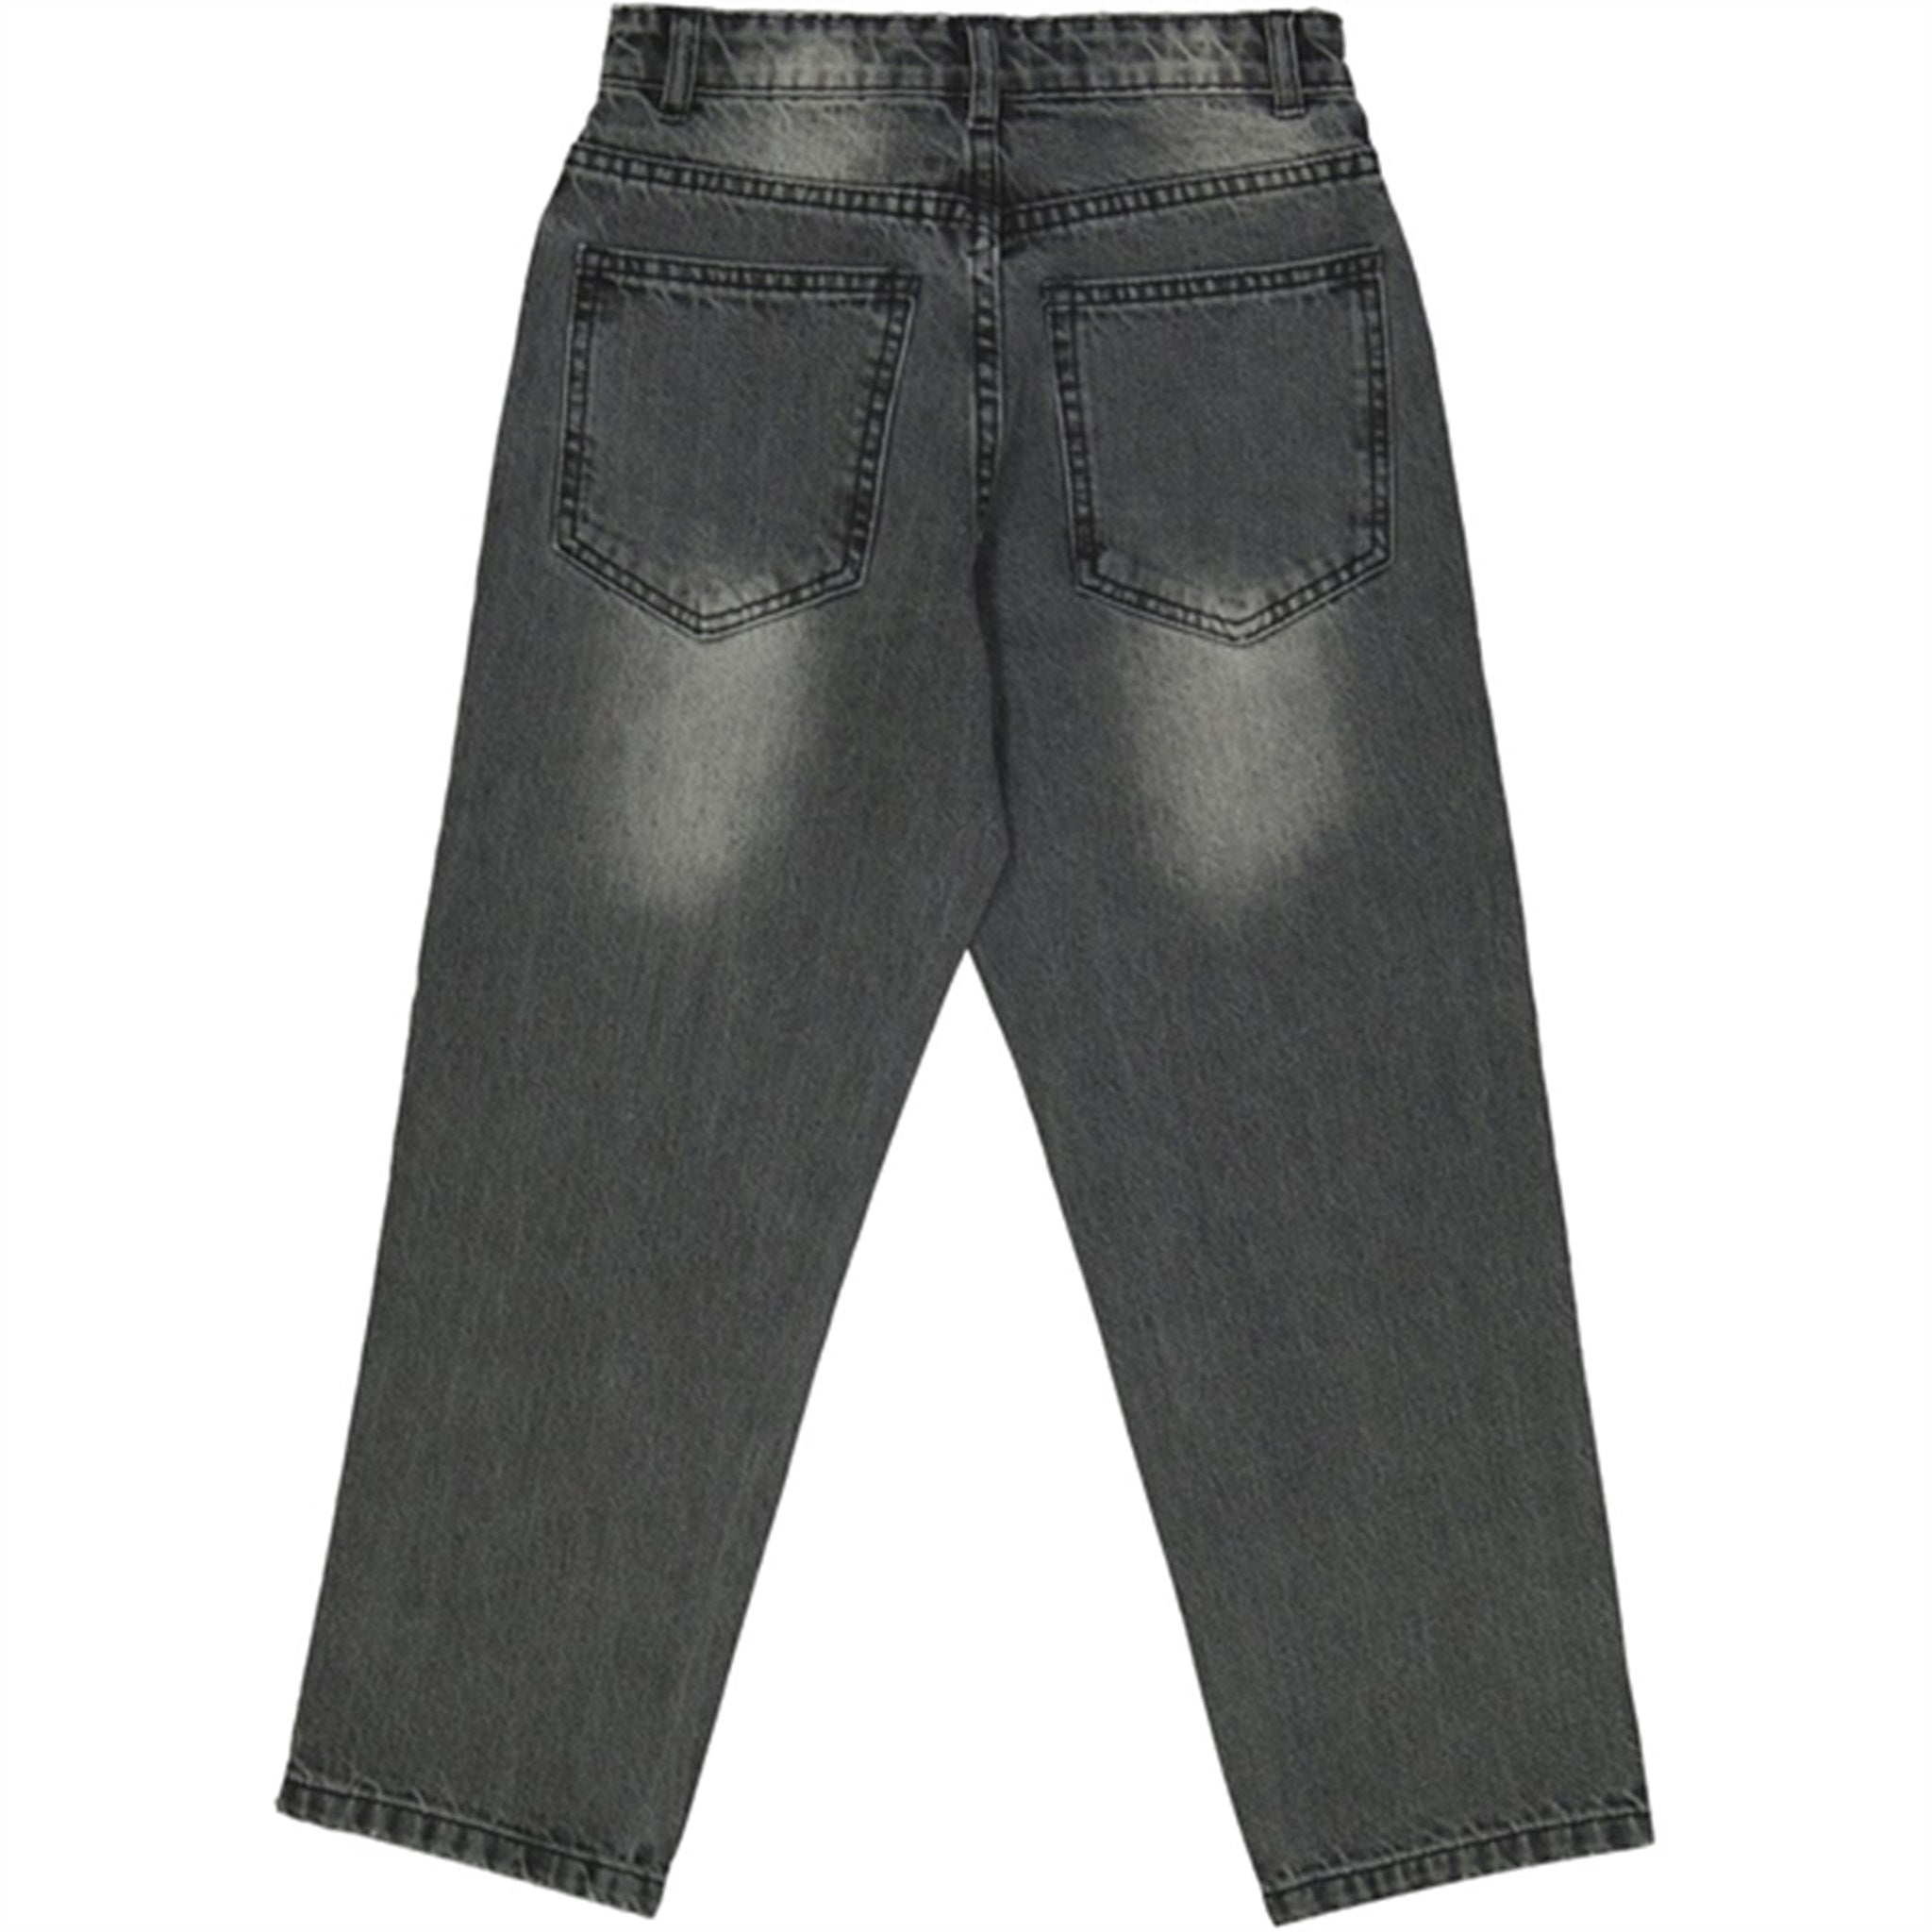 The NEW Medium Grey Re:turn Loose Fit Jeans 5